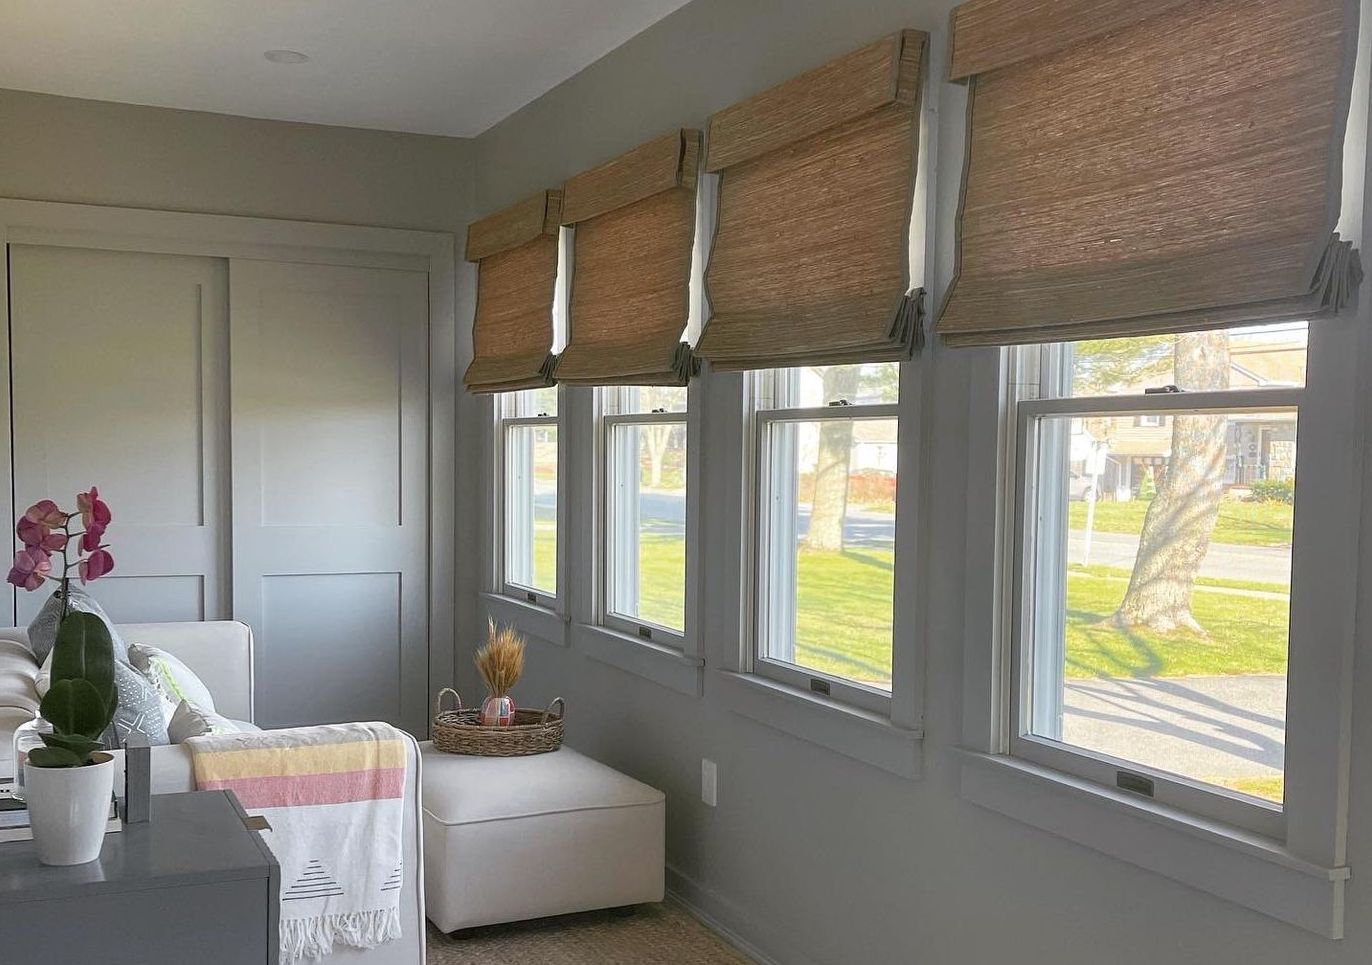 Woven wood shades cover windows in a modern sunroom